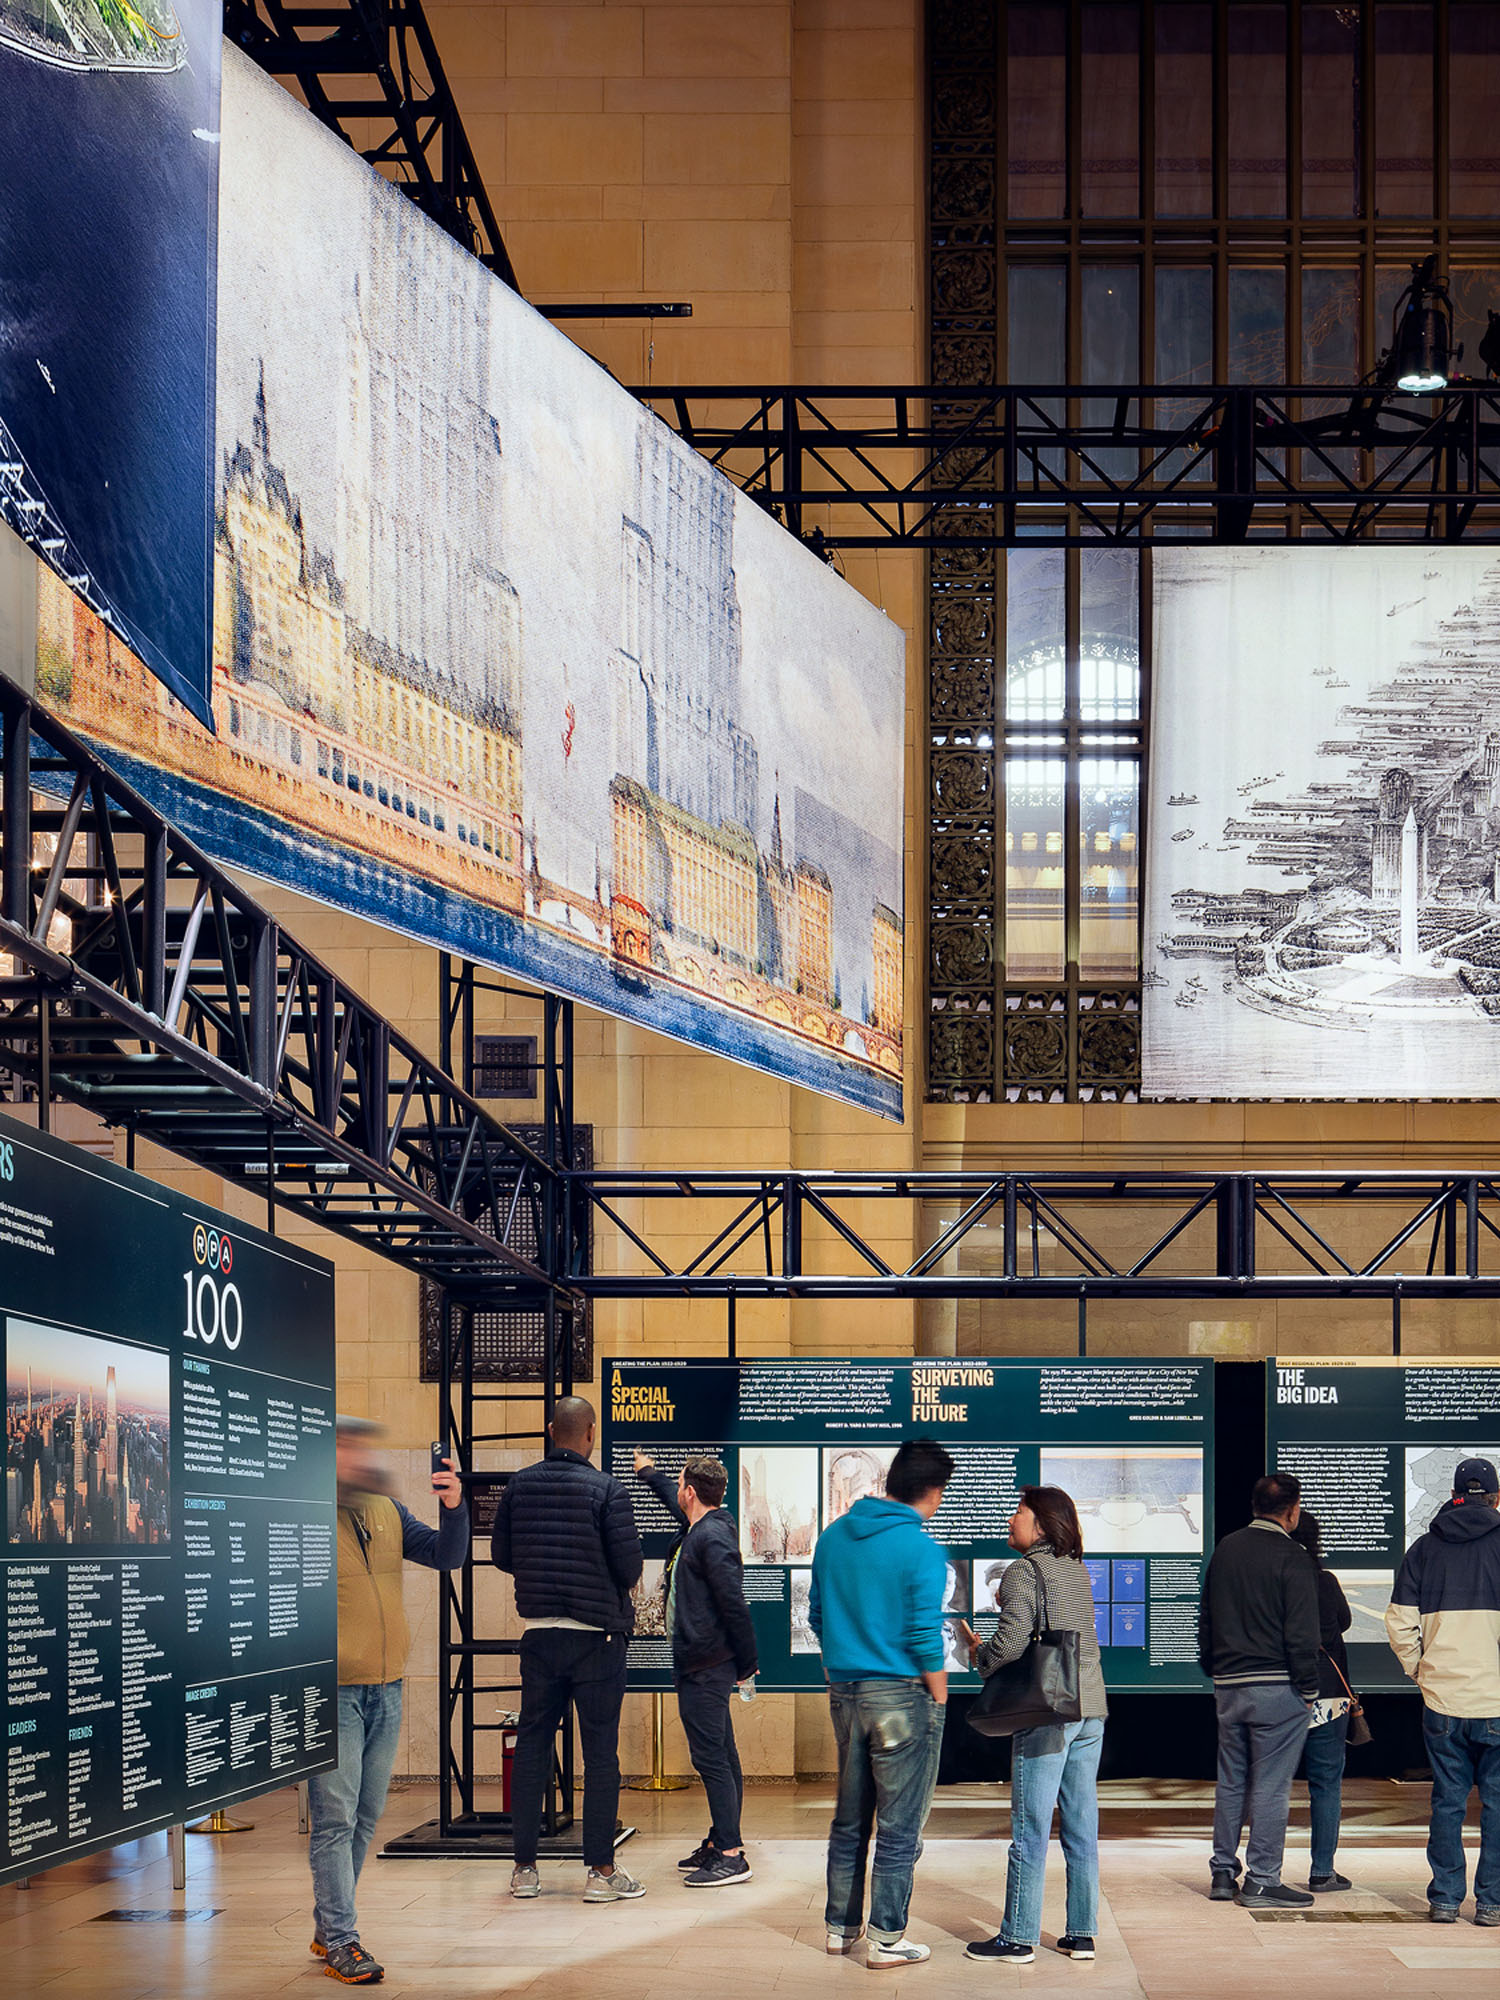 an image of an exhibition displaying historical documents from the Regional Plan Association